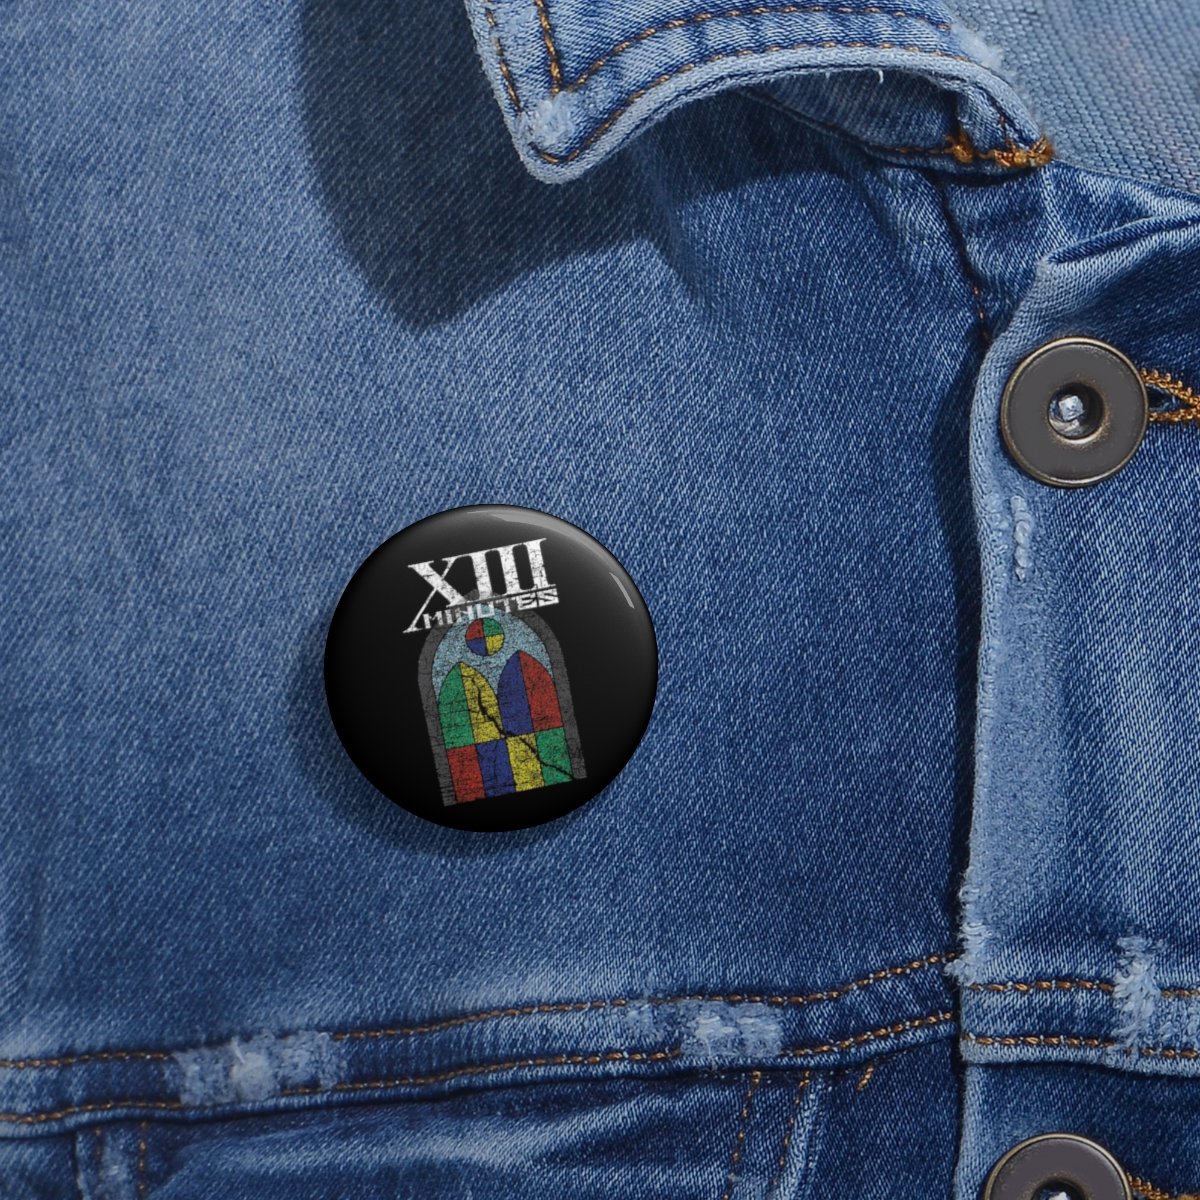 XIII Minutes – Fragile Pin Buttons